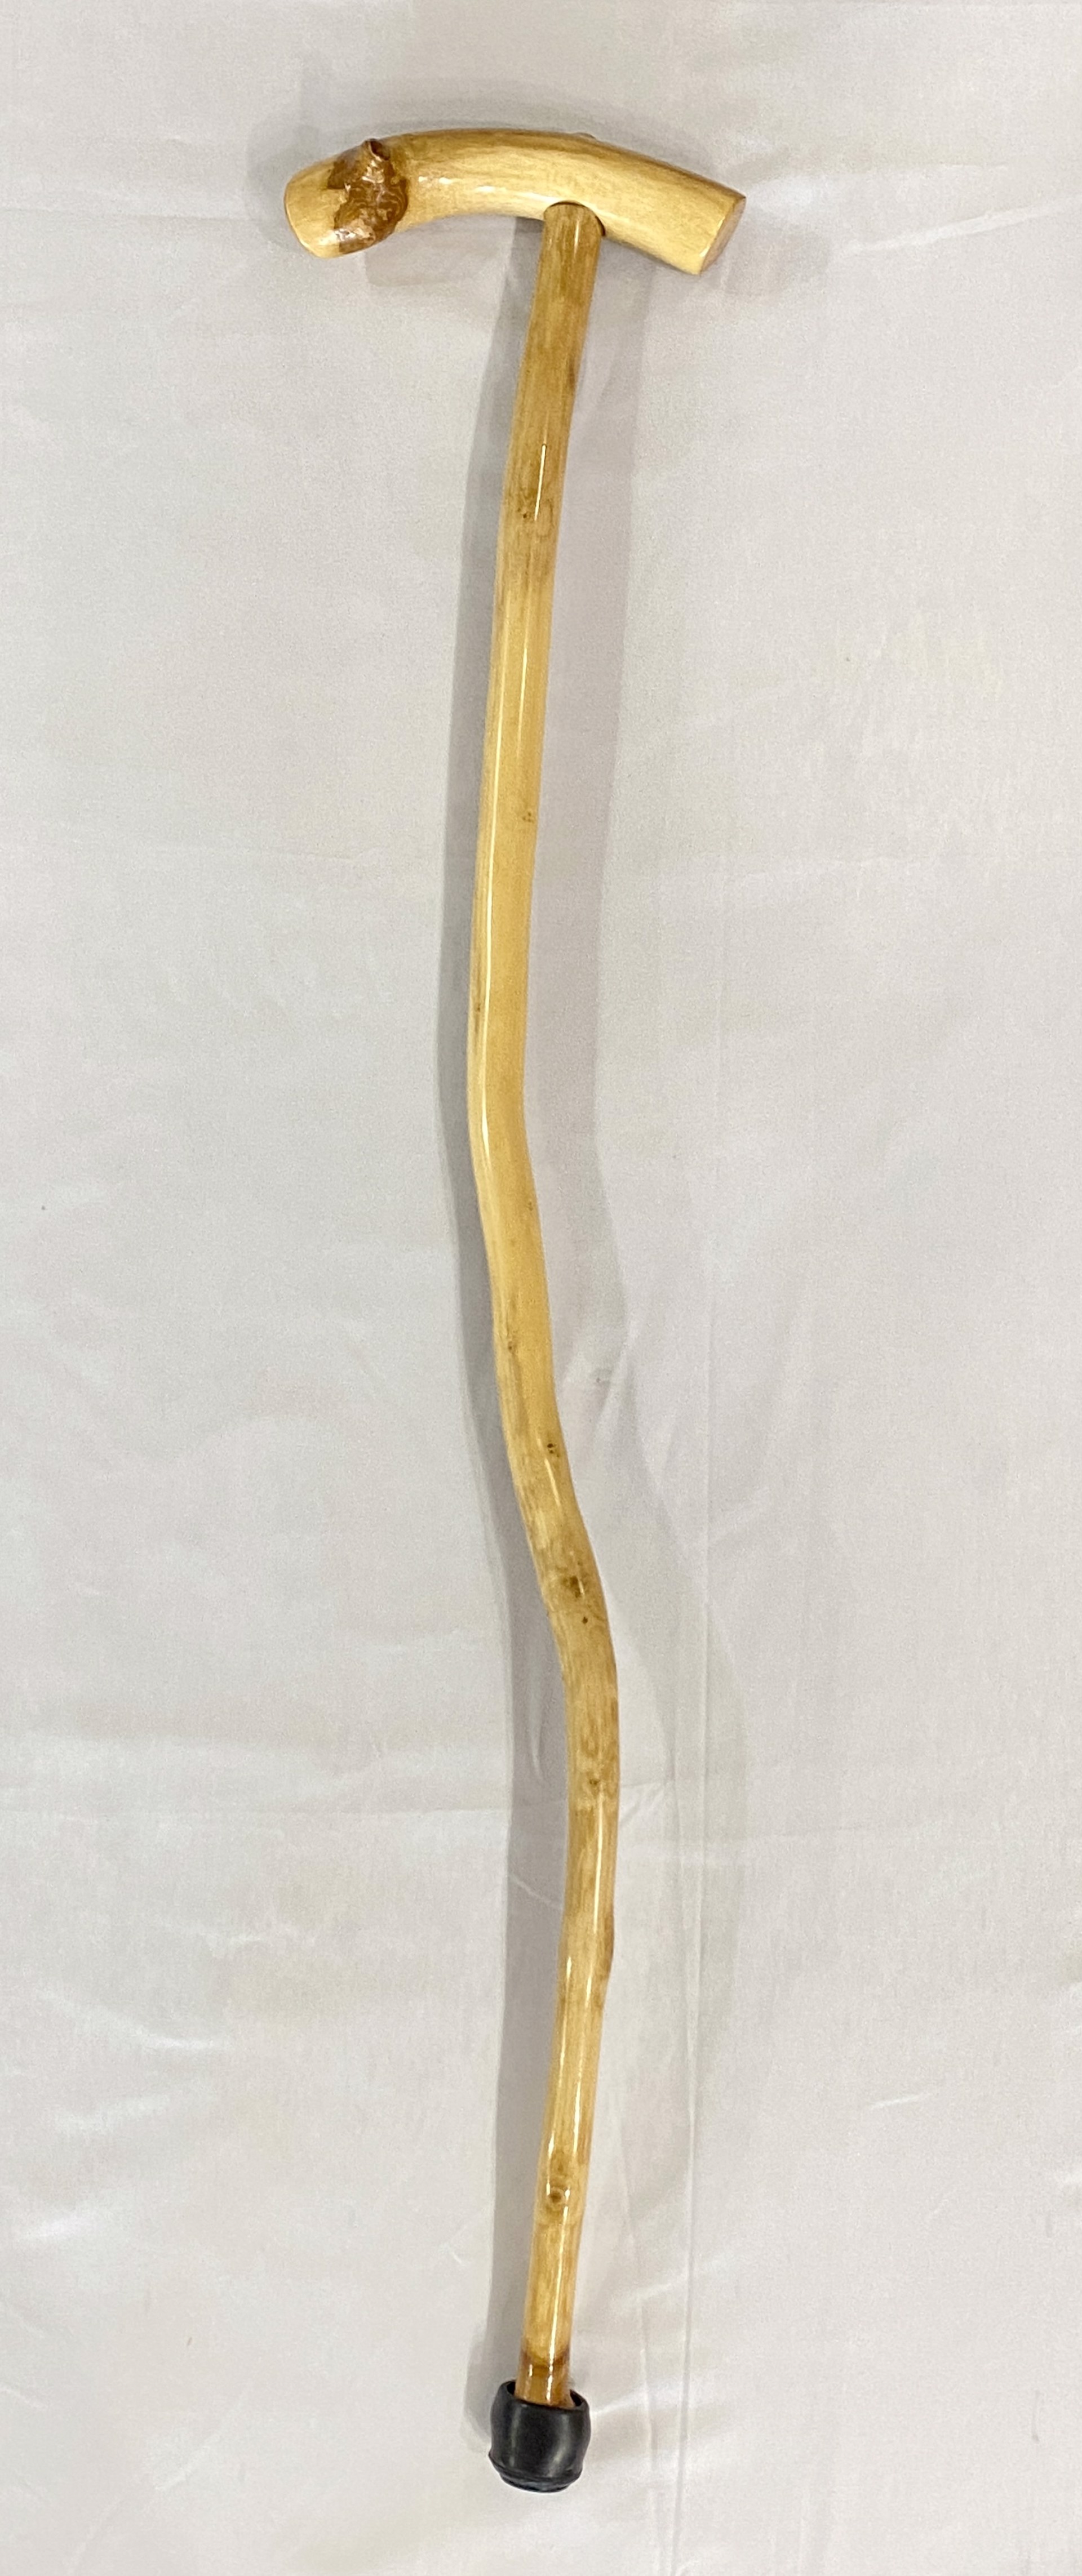 Wooden Walking Stick #1 by Kevin Foote